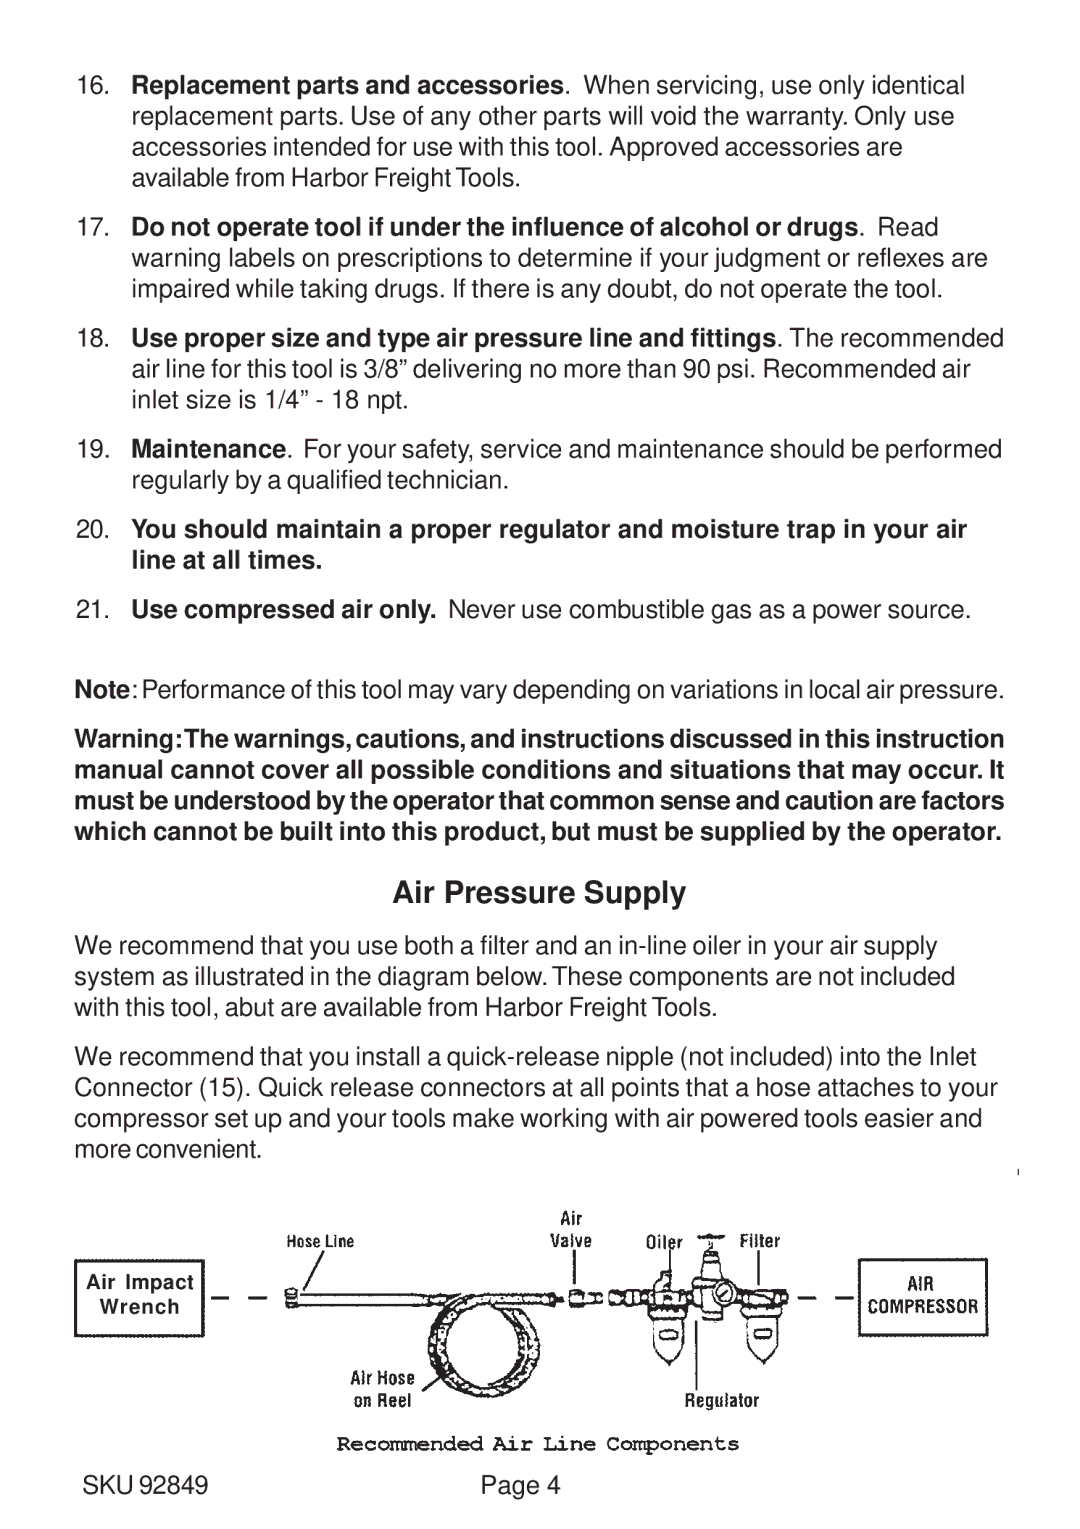 Harbor Freight Tools 92849 operating instructions Air Pressure Supply 